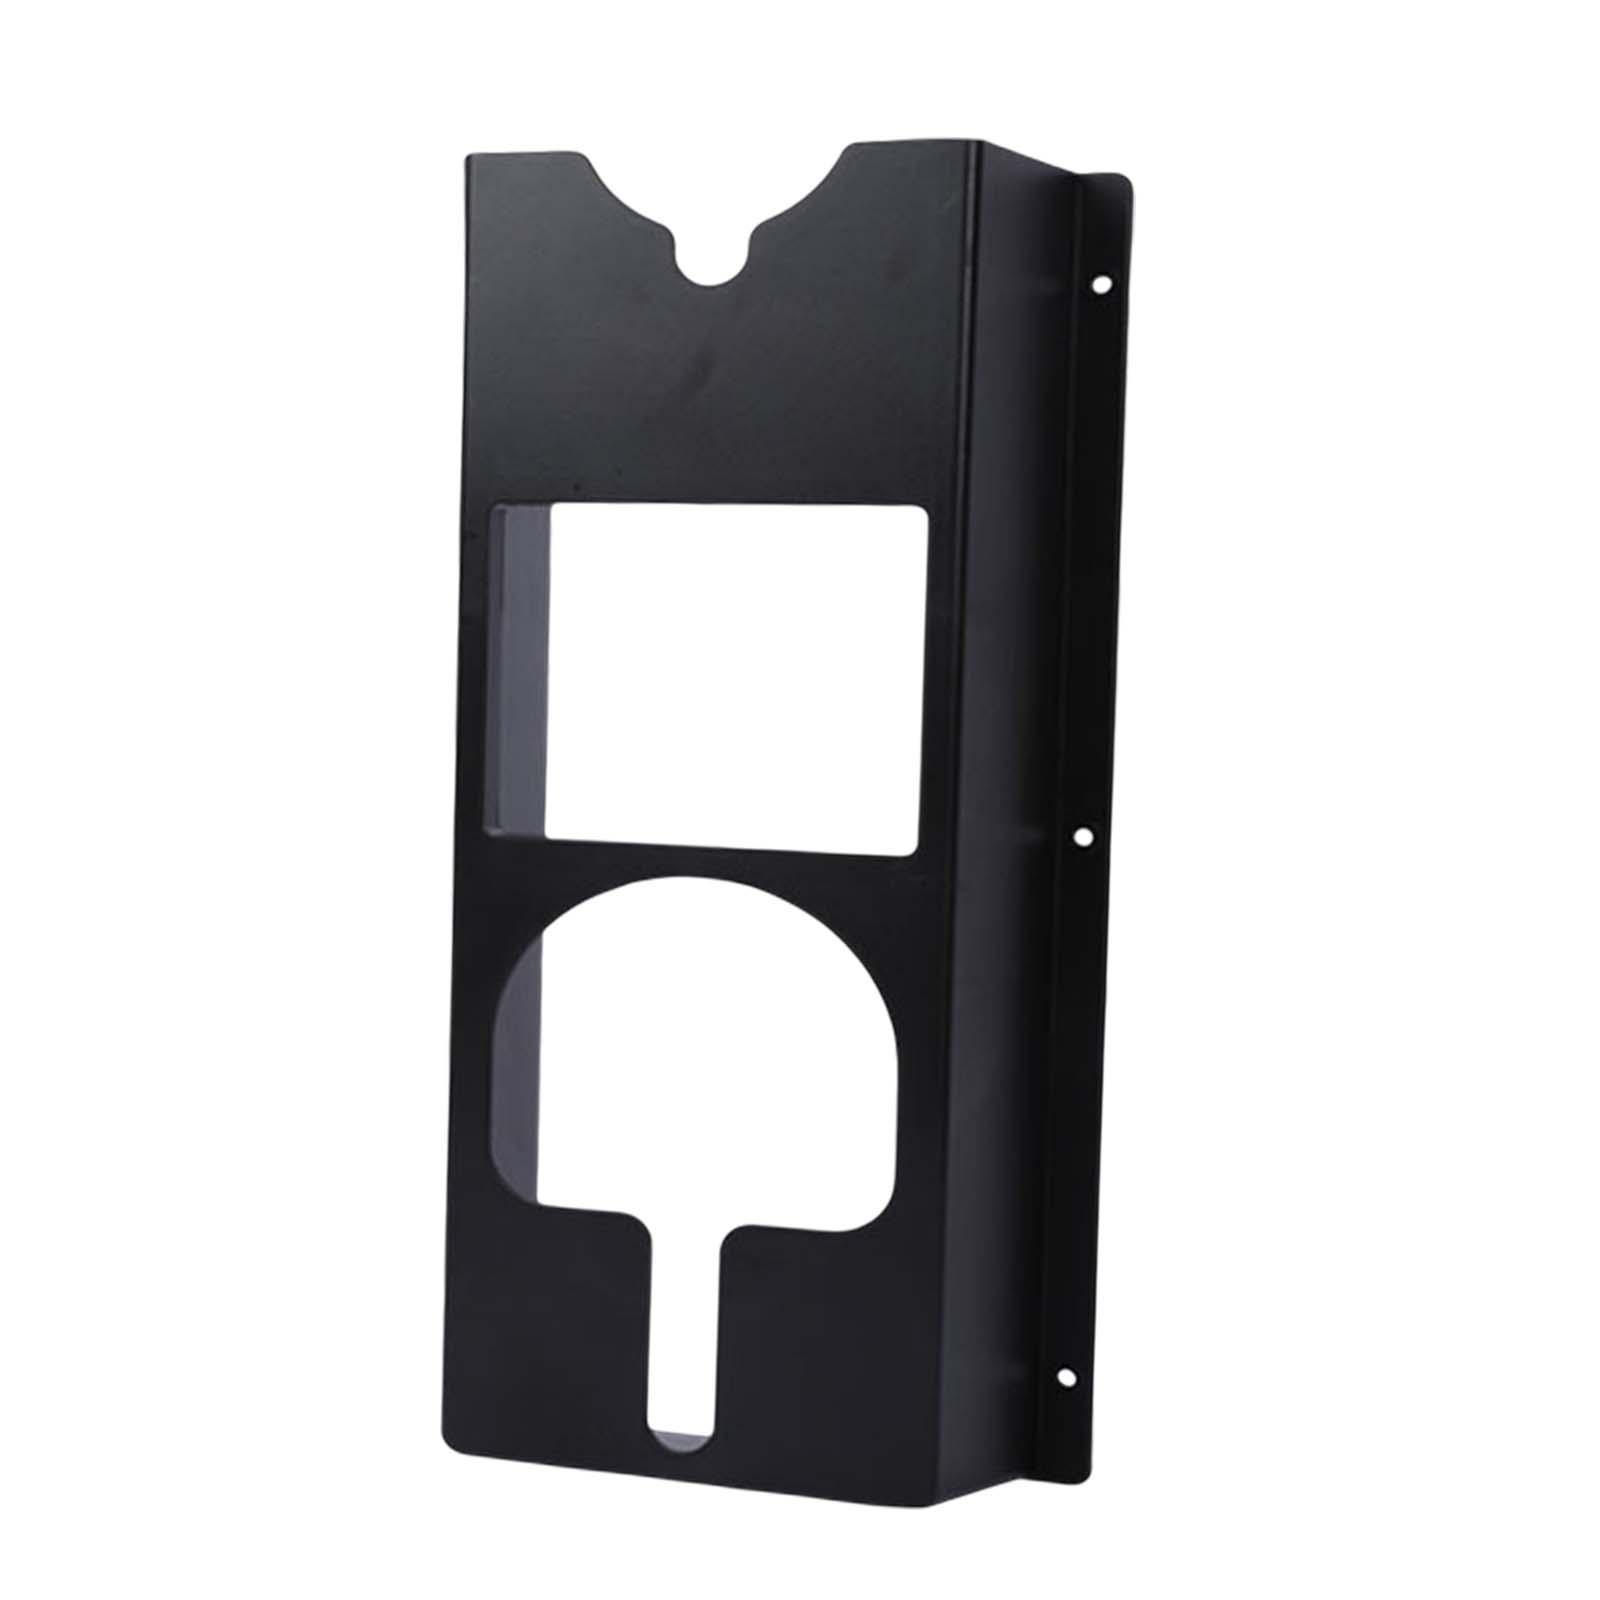 Angle Grinder Bracket Wall Mount Space Saving Detachable Storage  Stable for Garage Buffer Machines Home Polishing Machines Equipment